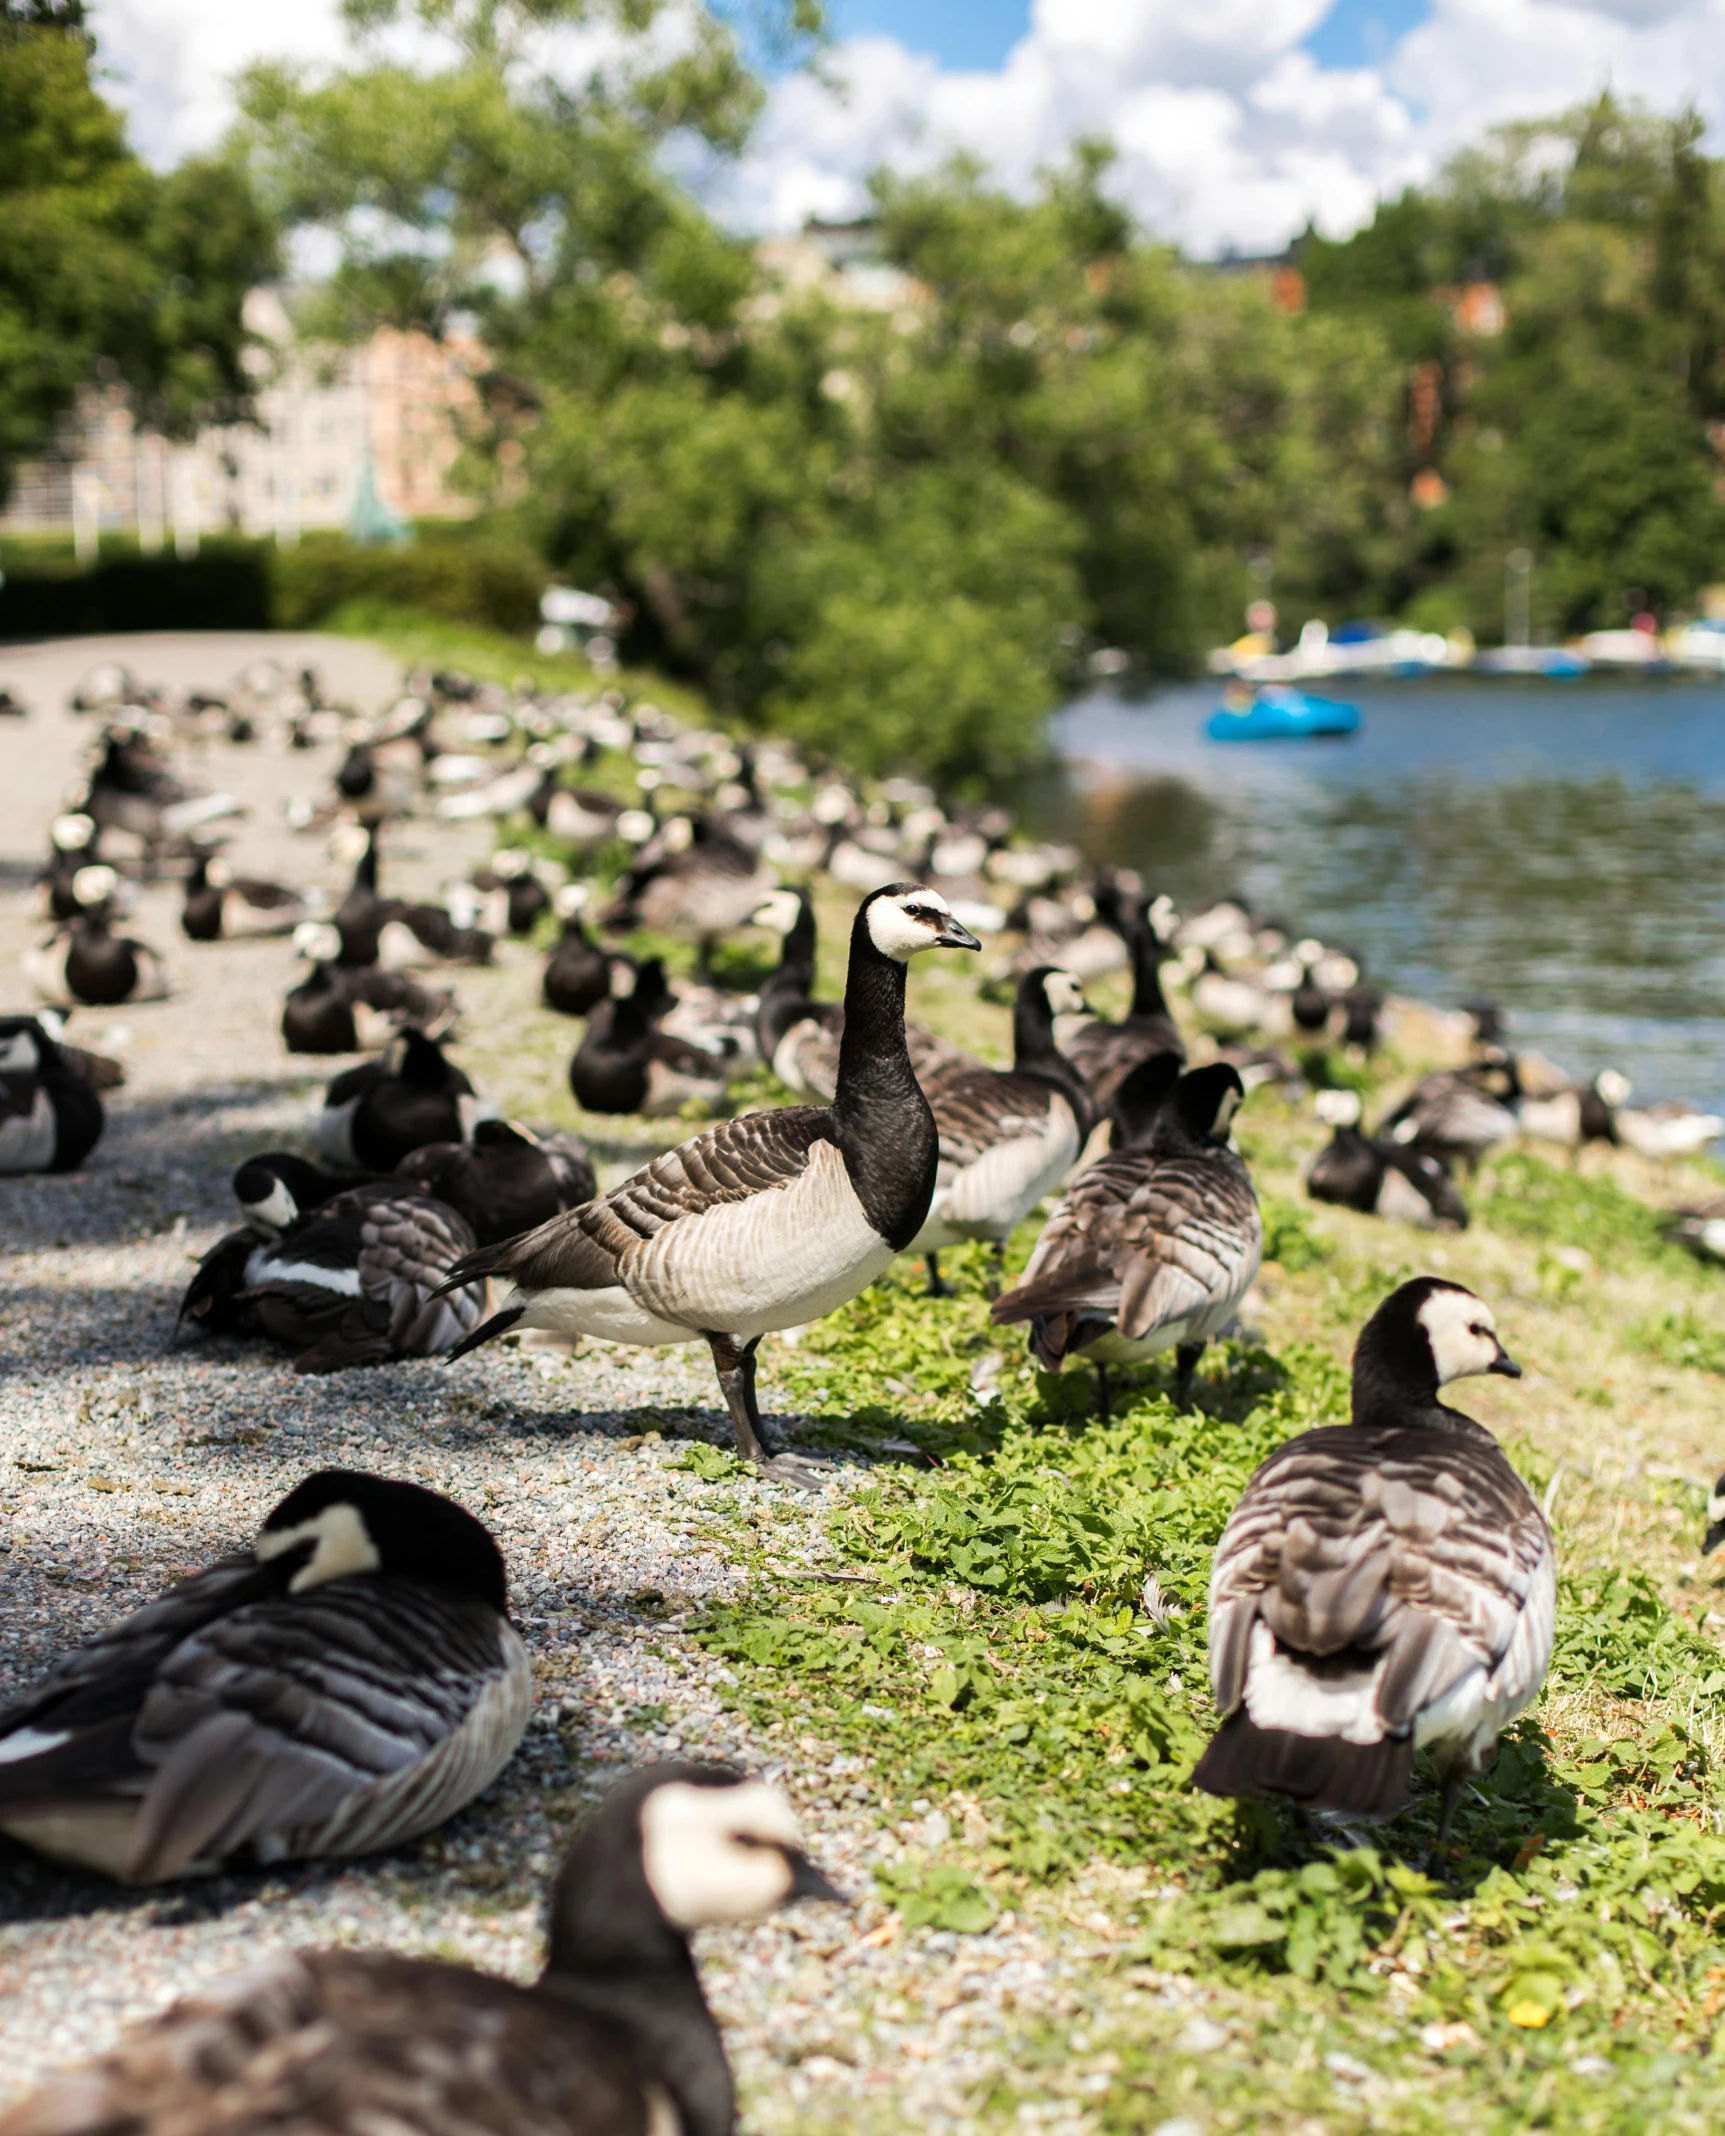 a flock of ducks standing next to a body of water, stockholm, parks and monuments, al fresco, profile image